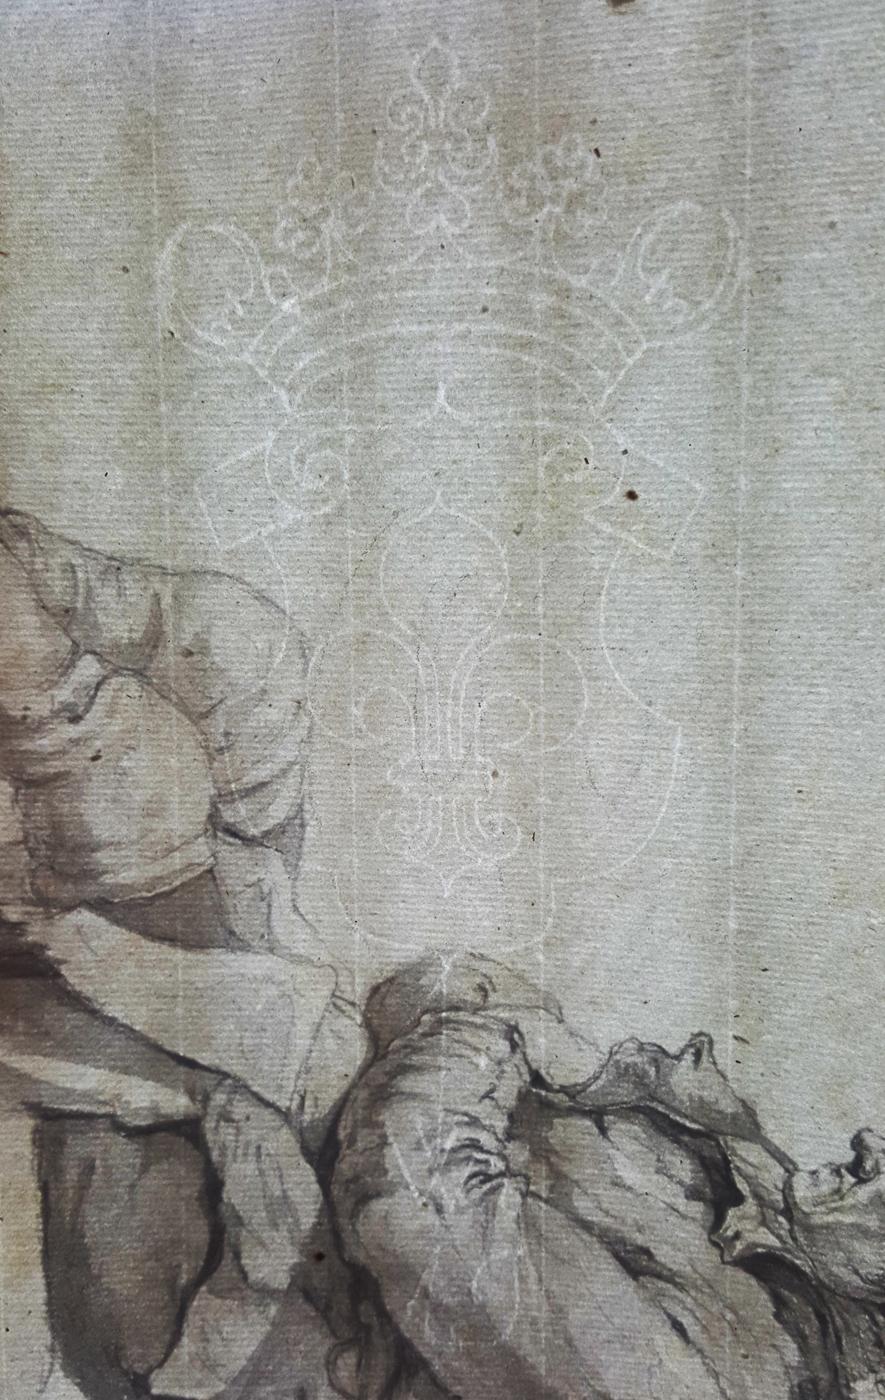 19th C Dutch Old Master Drawing Johannes Christiaan Schotel Study of Seated Man - Beige Figurative Art by Johannes Christianus Schotel